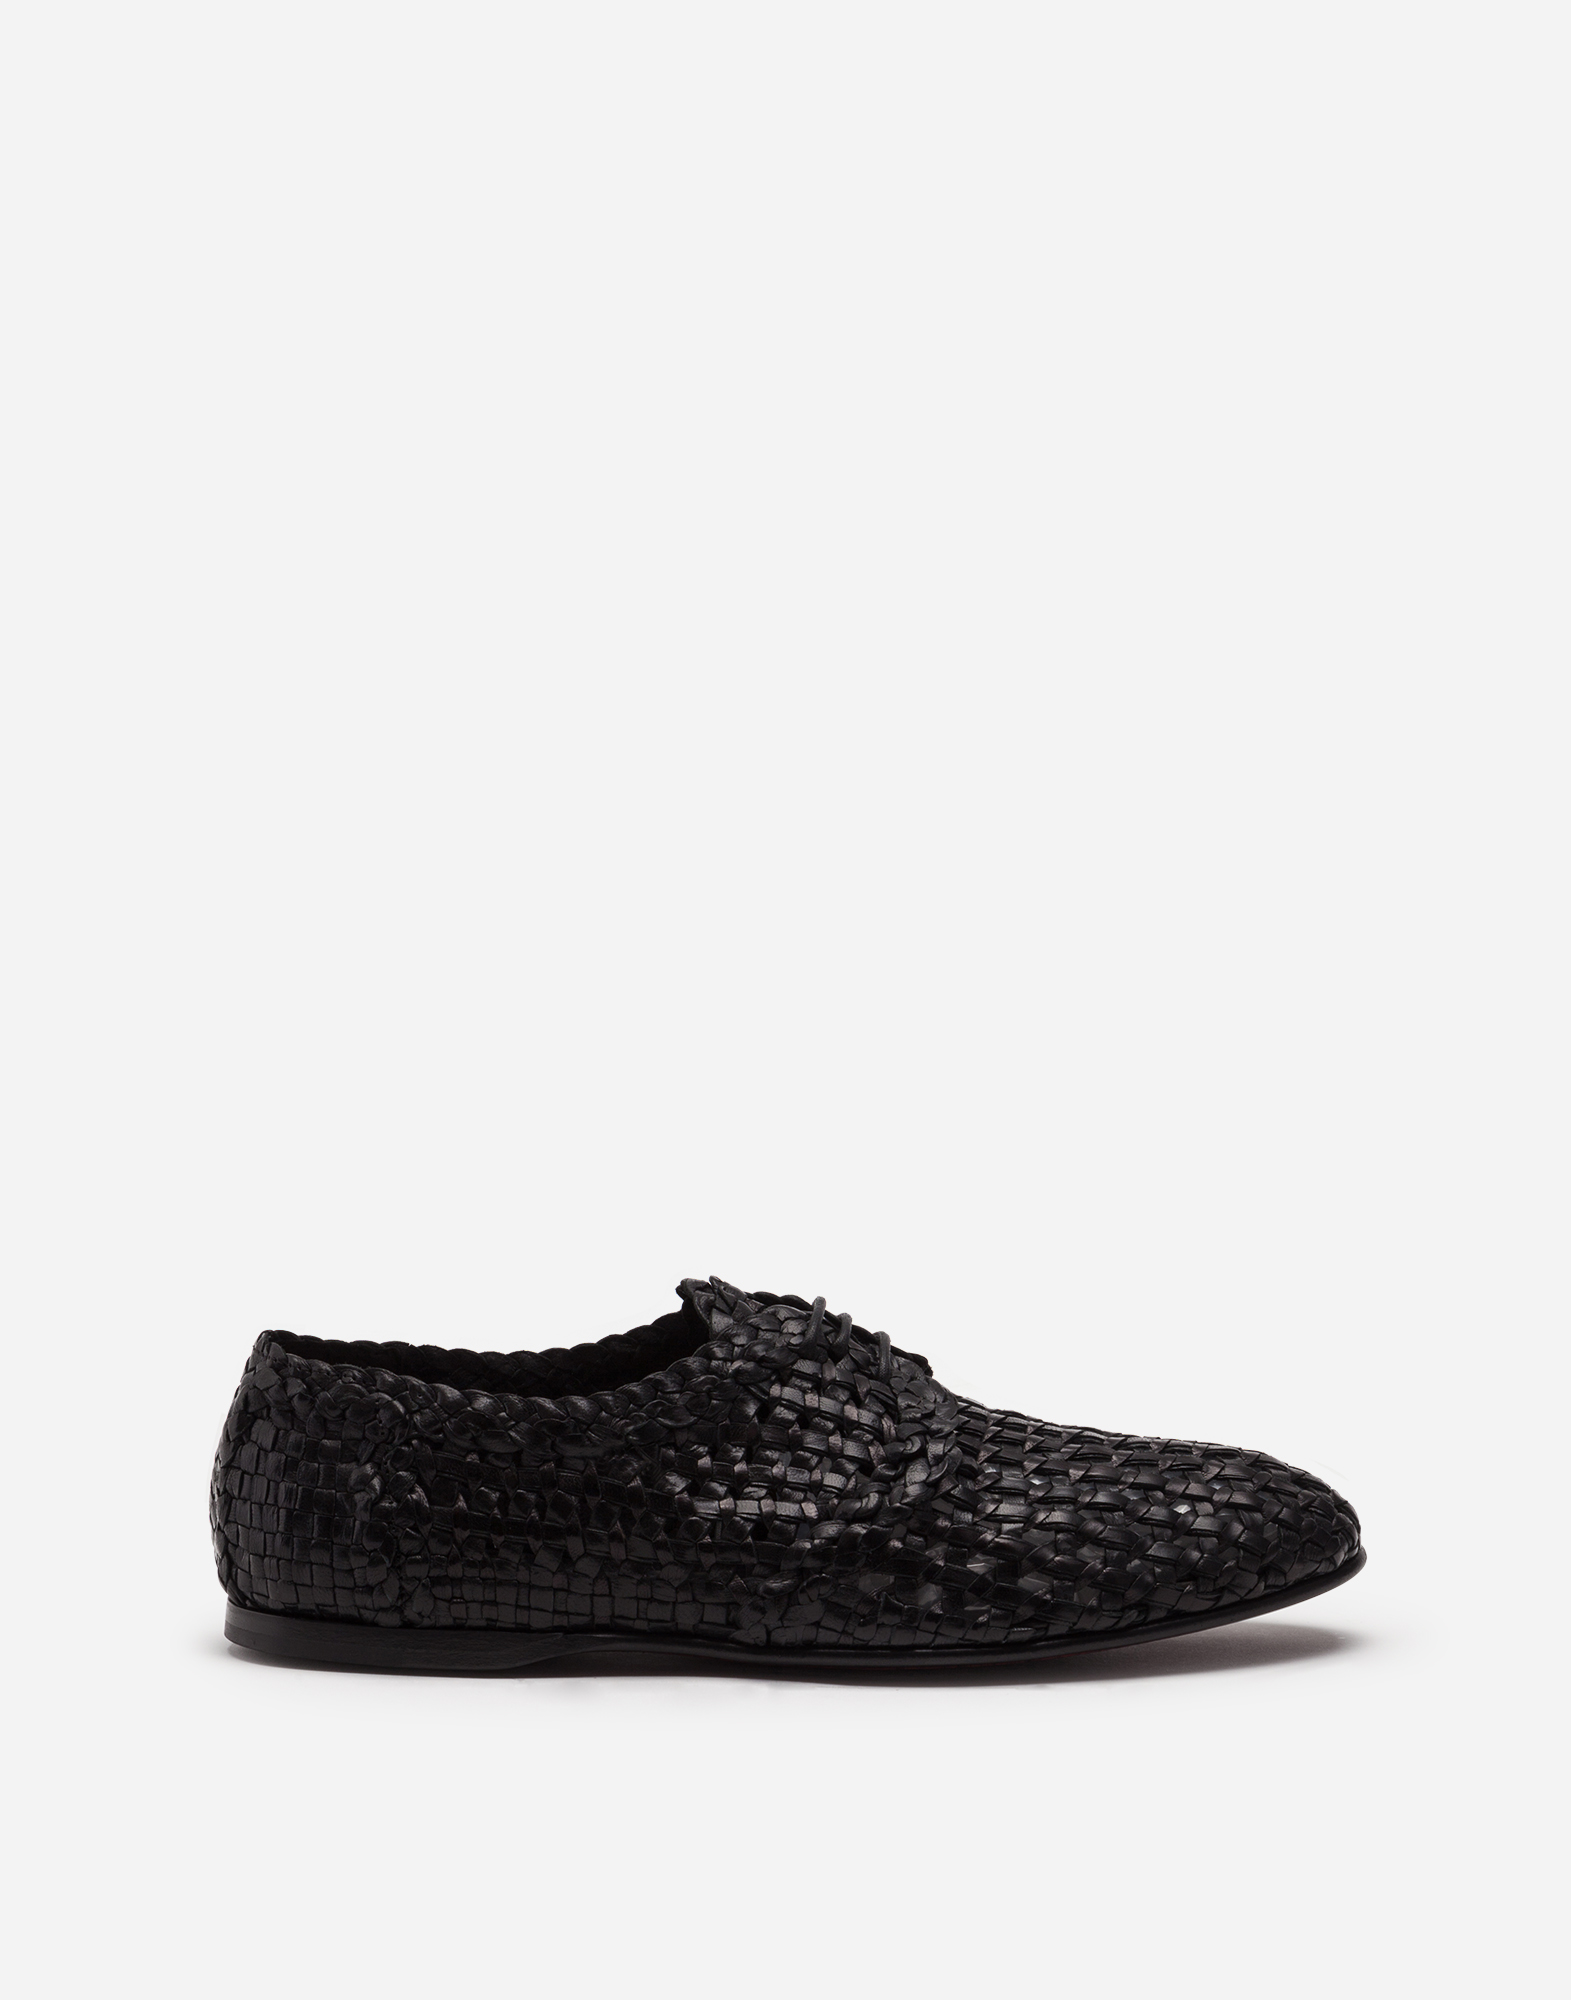 Persia woven leather derby shoes in Black